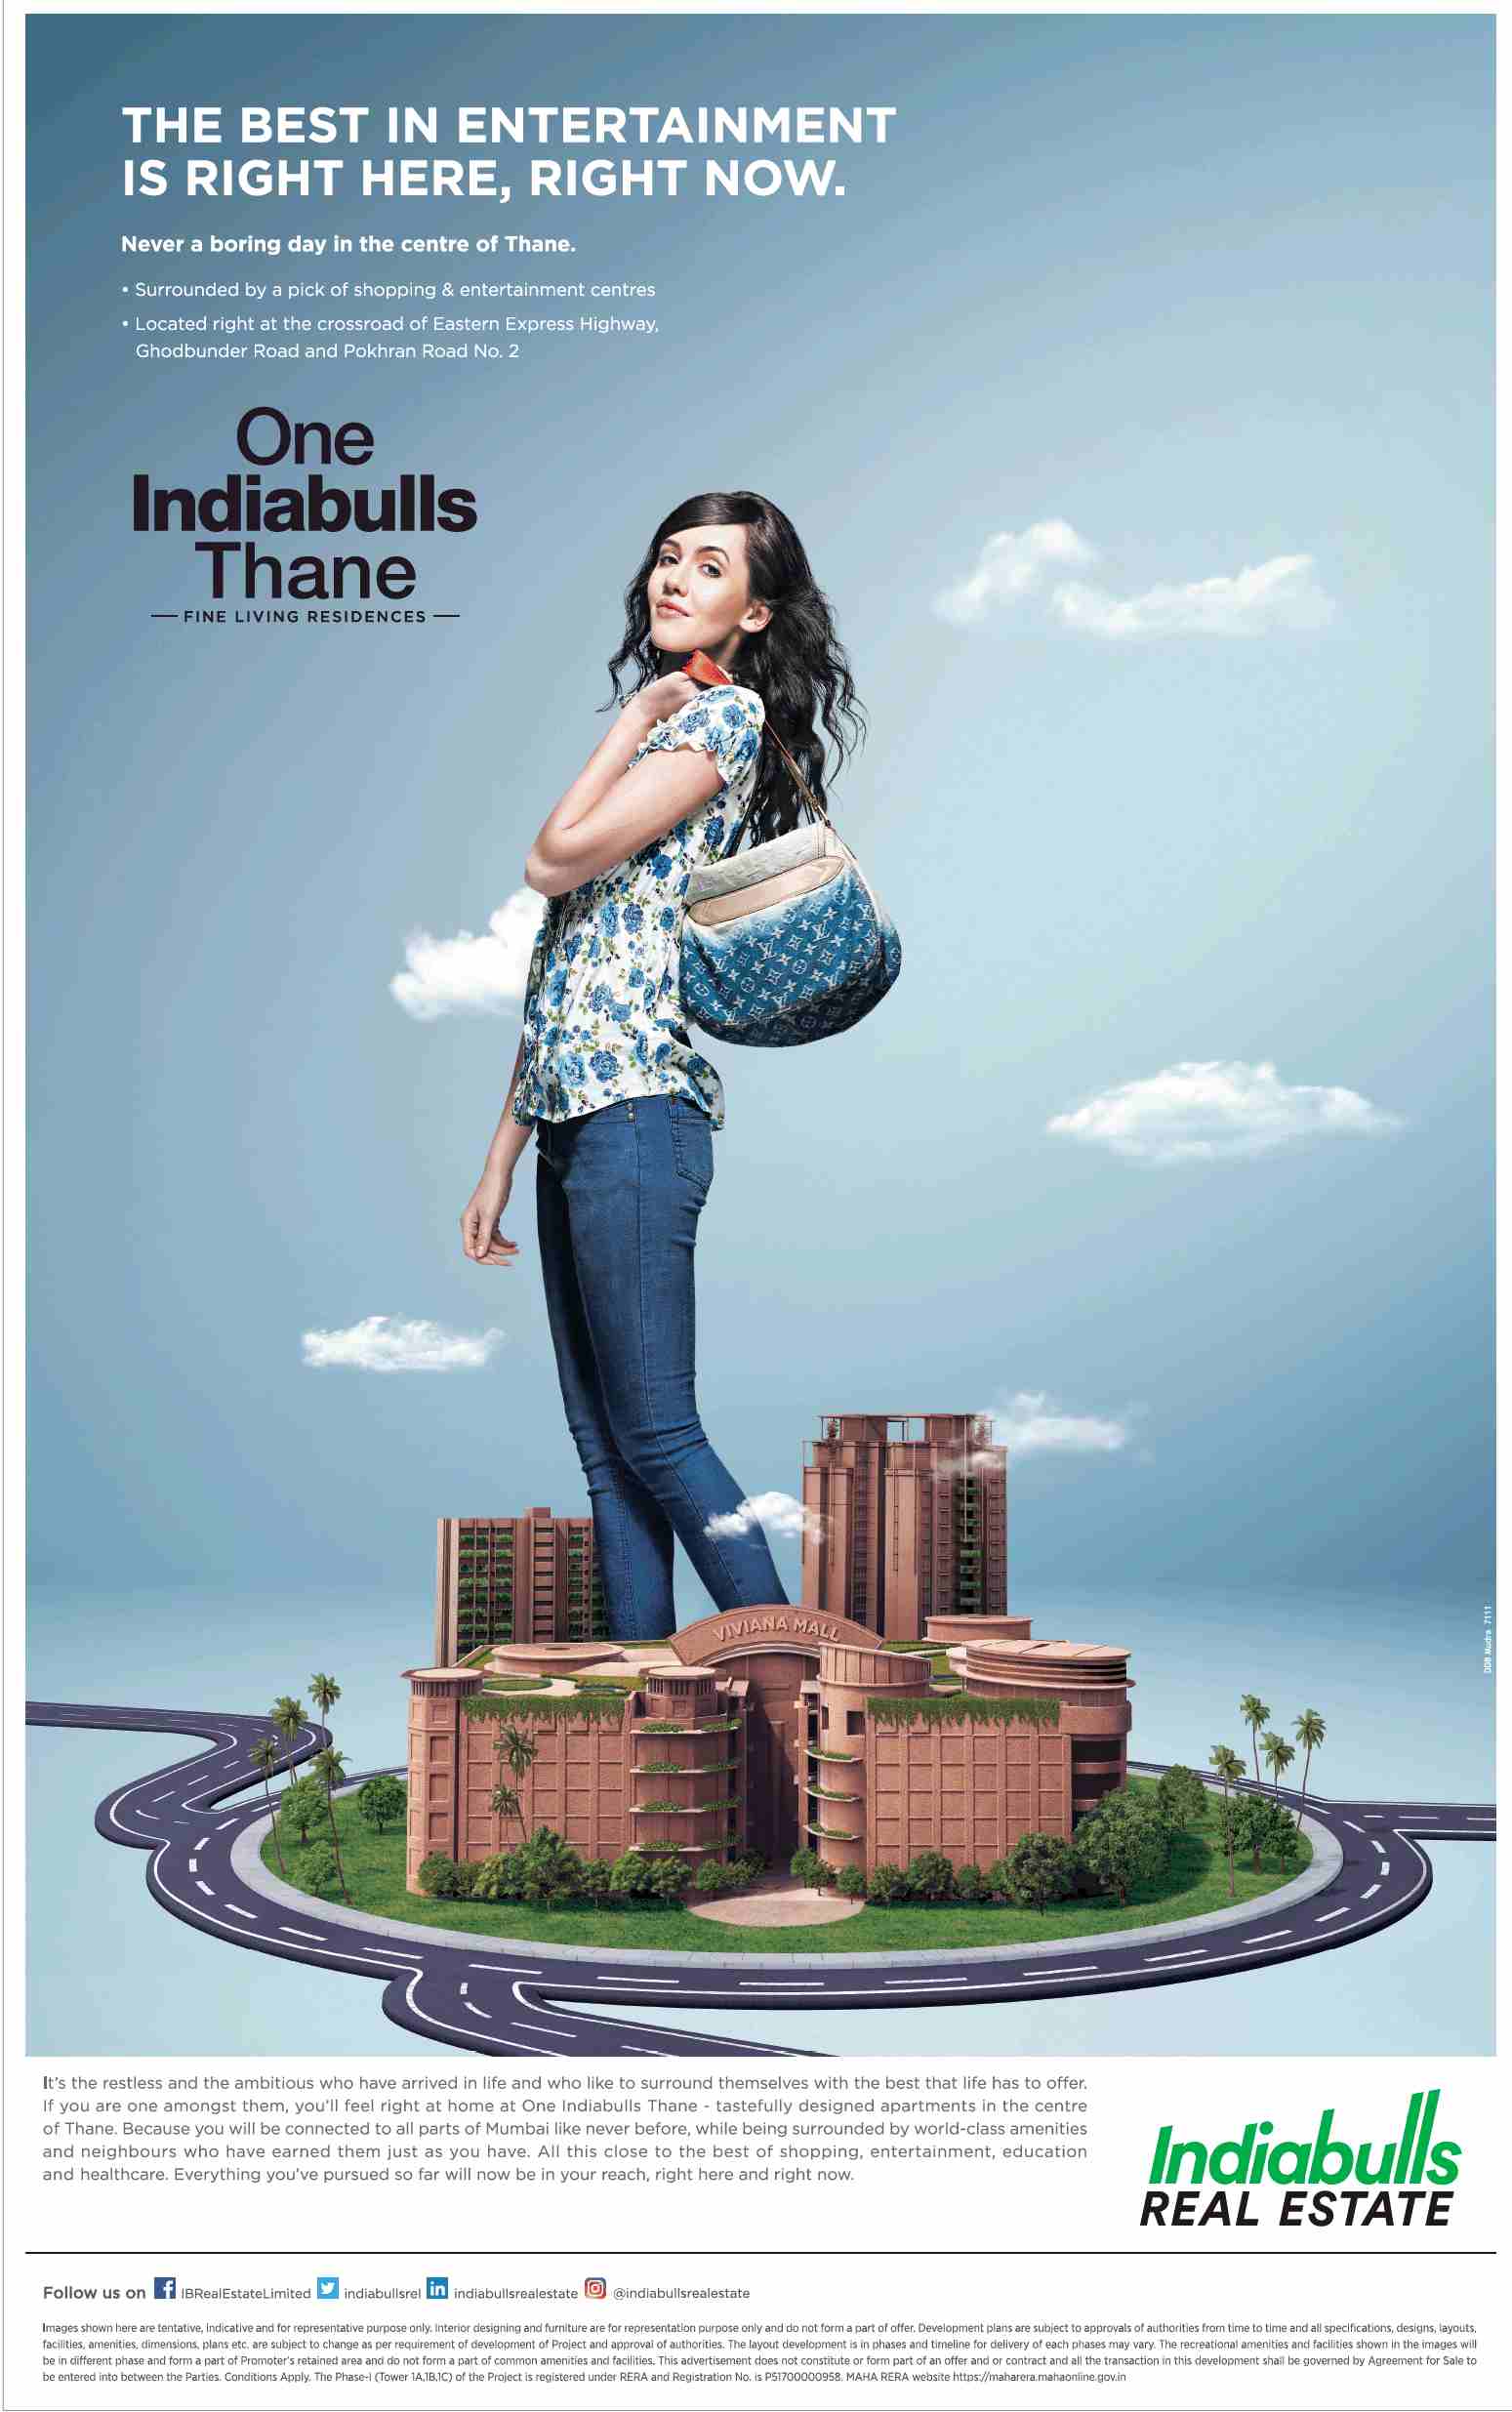 The best in entertainment is right here, right now at One Indiabulls Thane in Mumbai Update